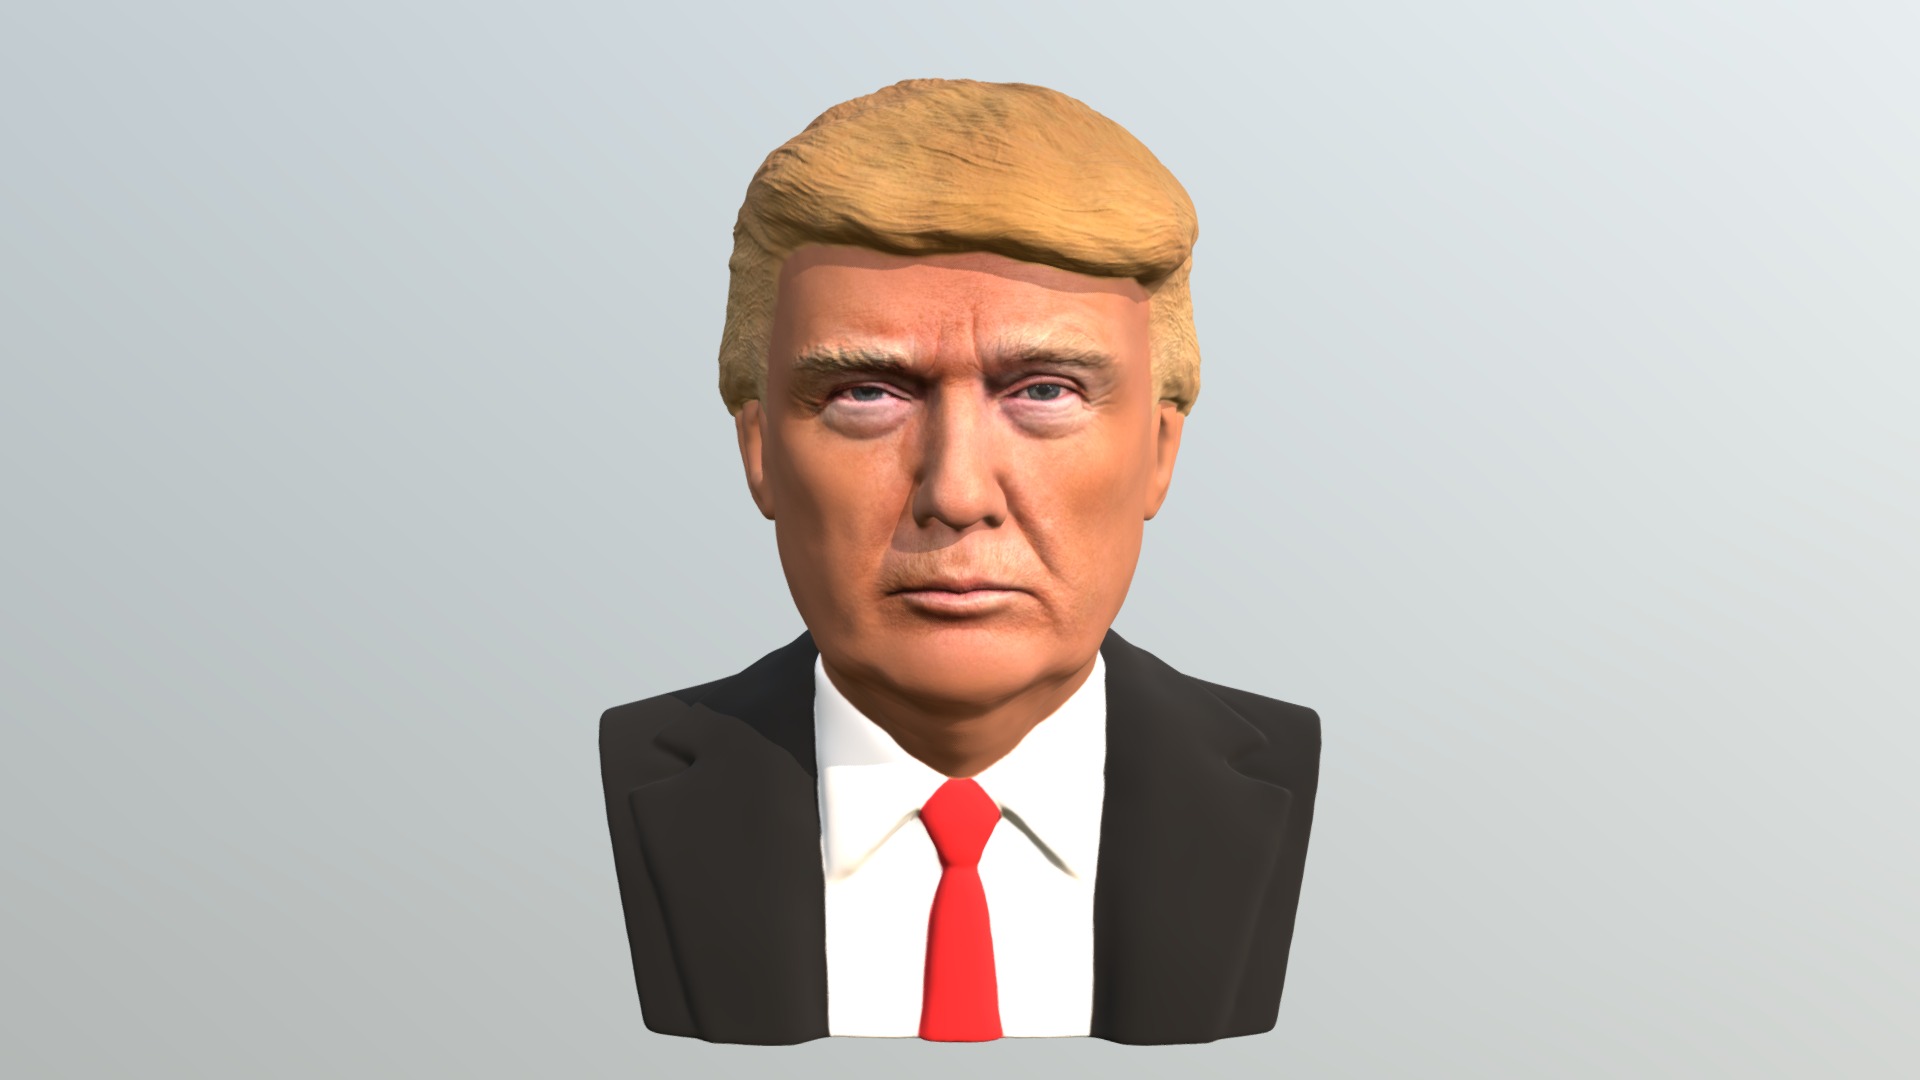 3D model Donald Trump bust for full color 3D printing - This is a 3D model of the Donald Trump bust for full color 3D printing. The 3D model is about a man in a suit.